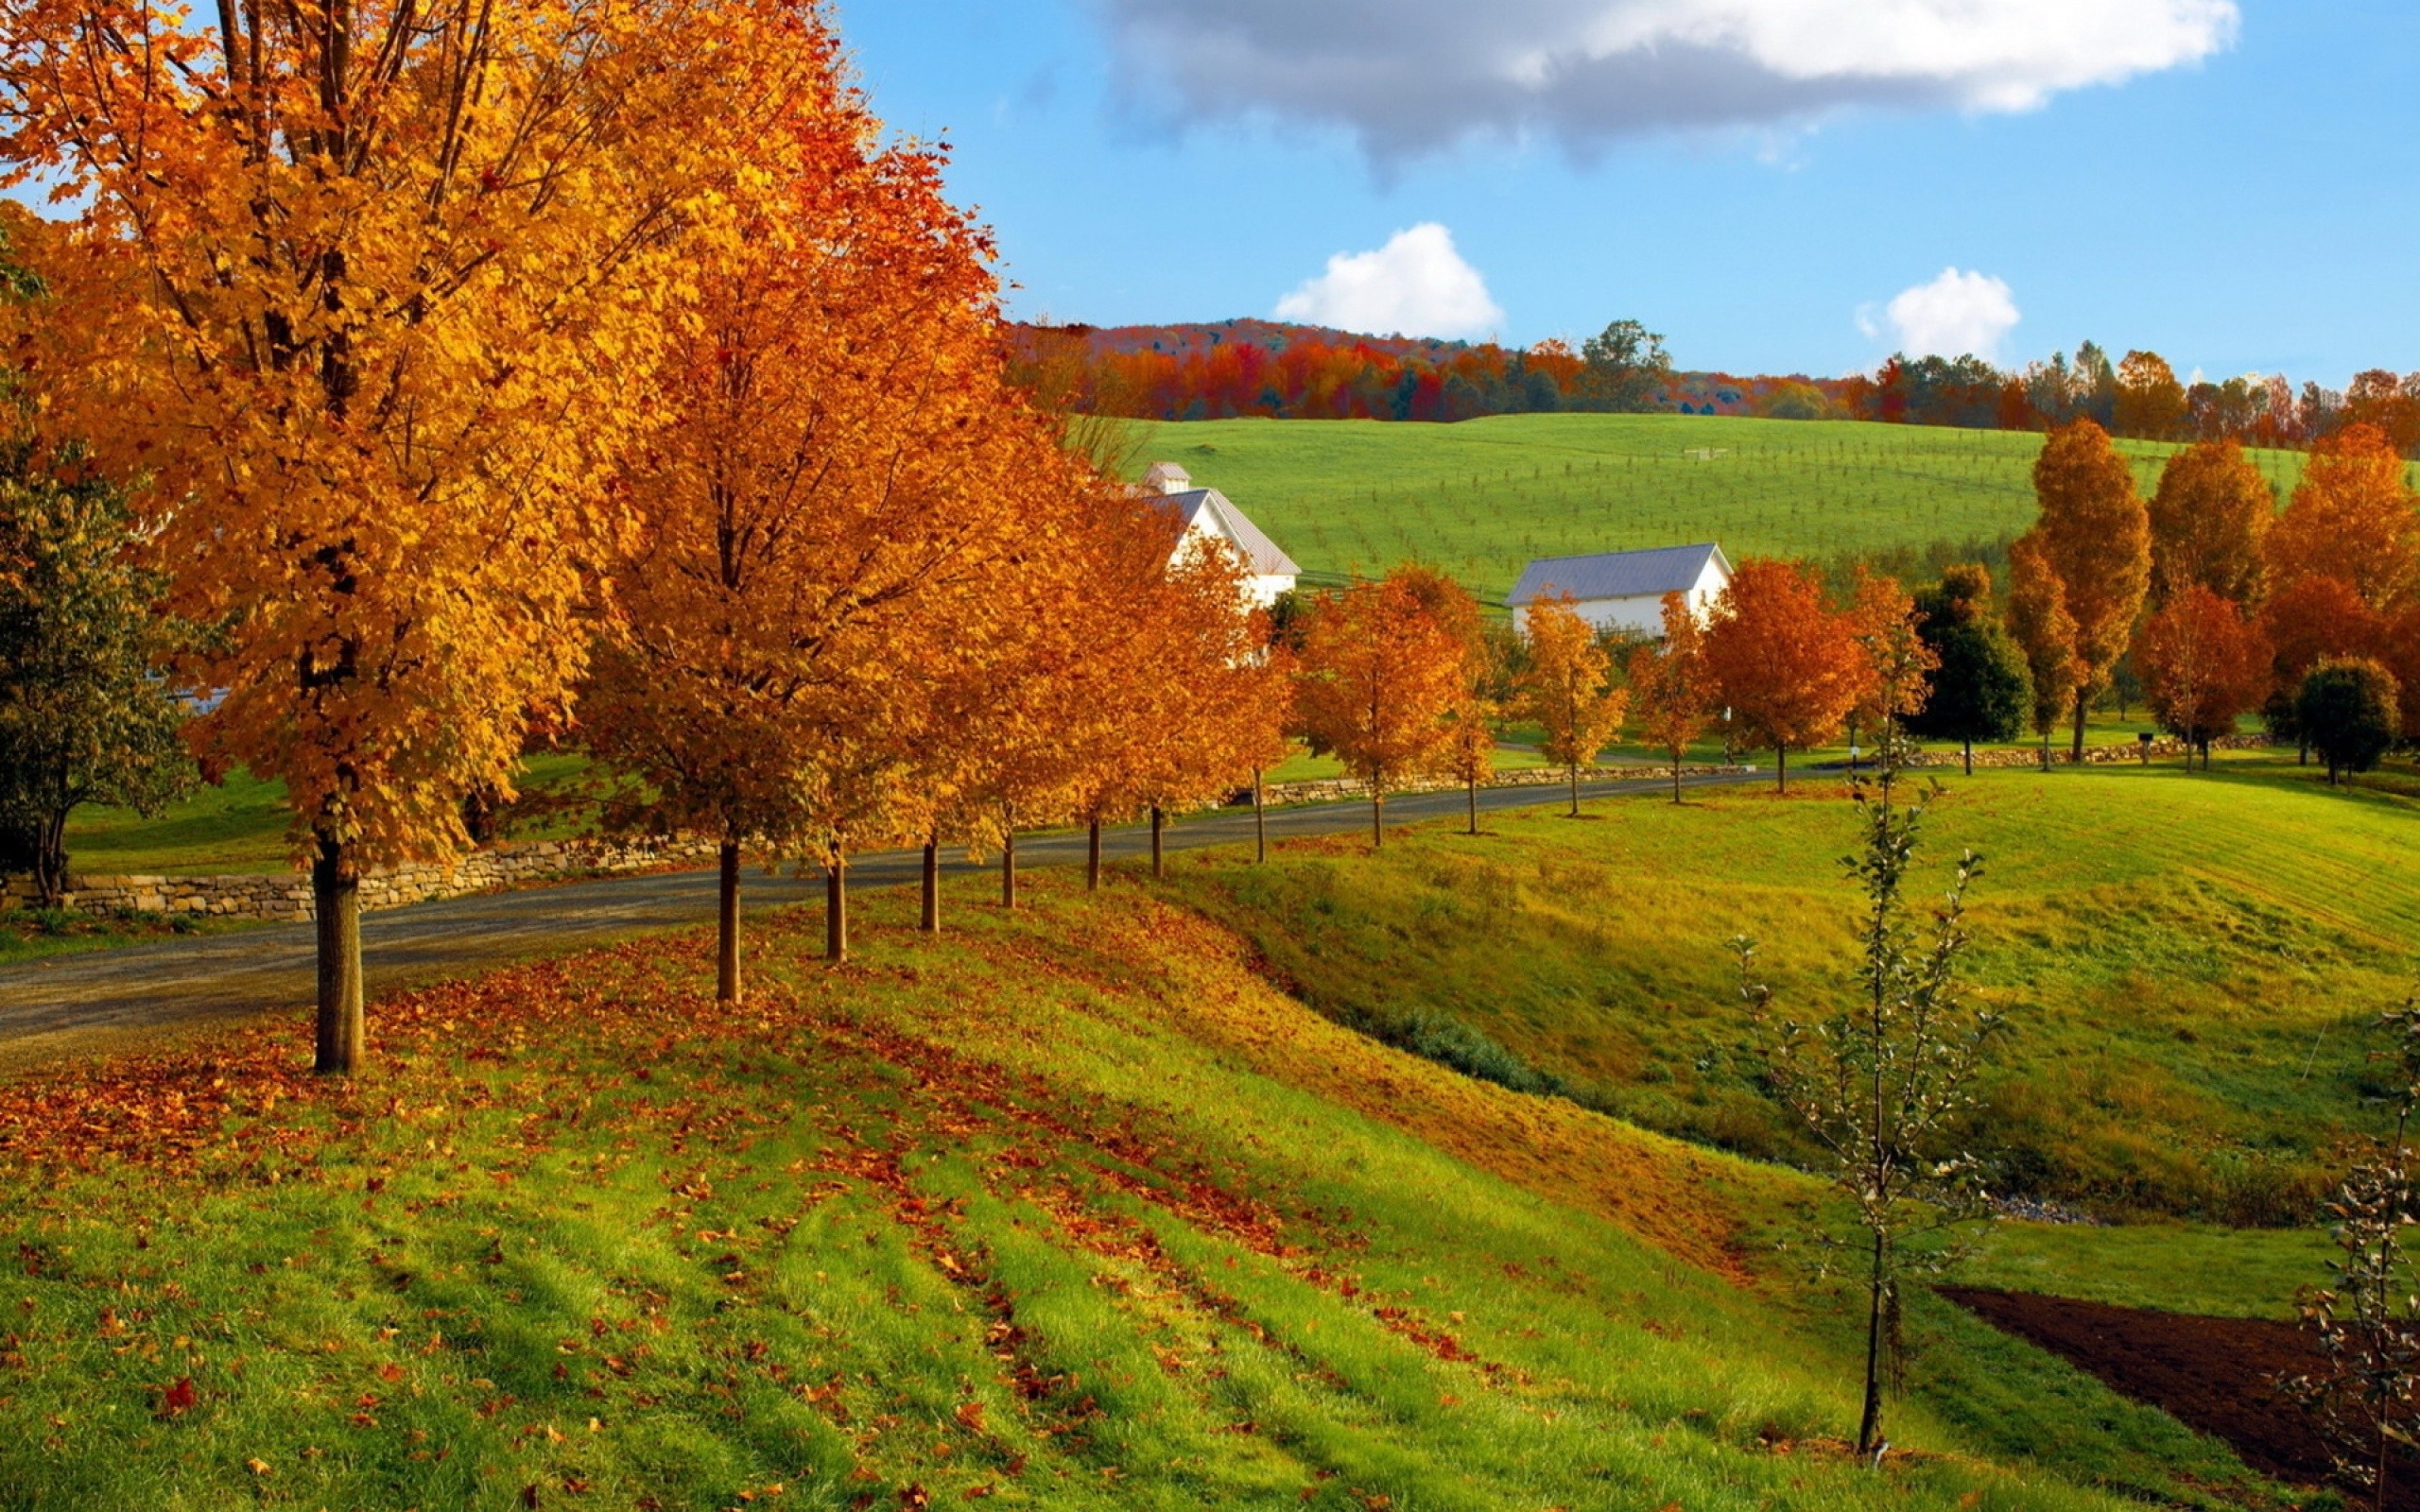 2560x1600 pin Wallpaper clipart countryside #9